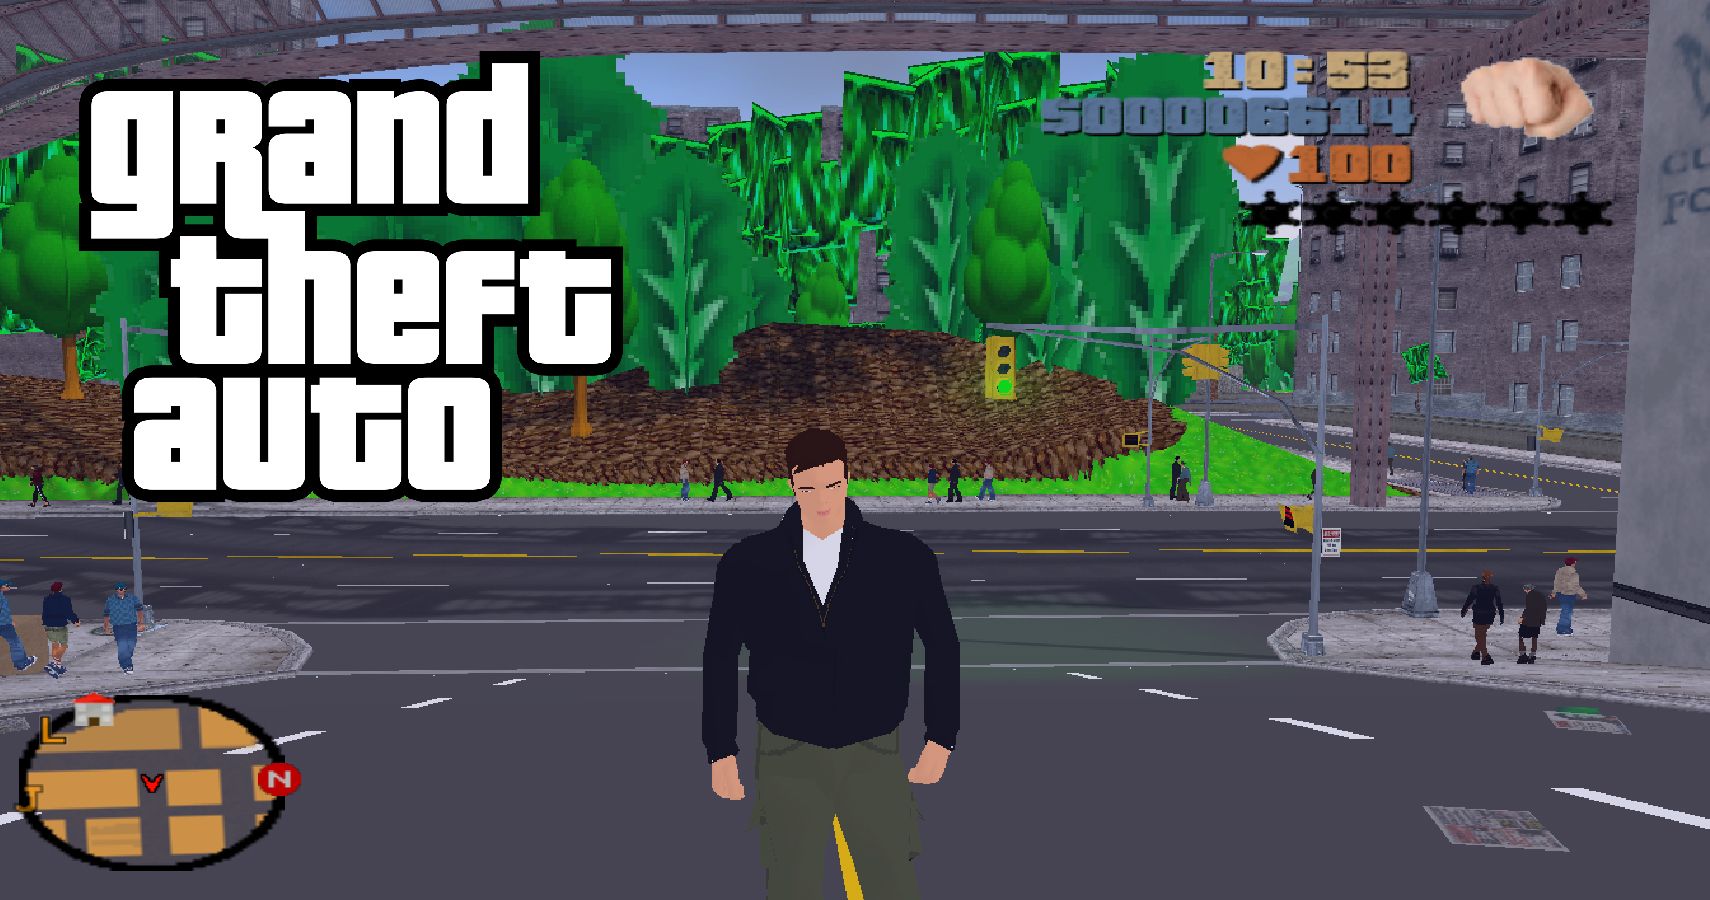 How You Can Tell That GTA: San Andreas is a Really Old Game - Video Games -  video game memes, Pokémon GO